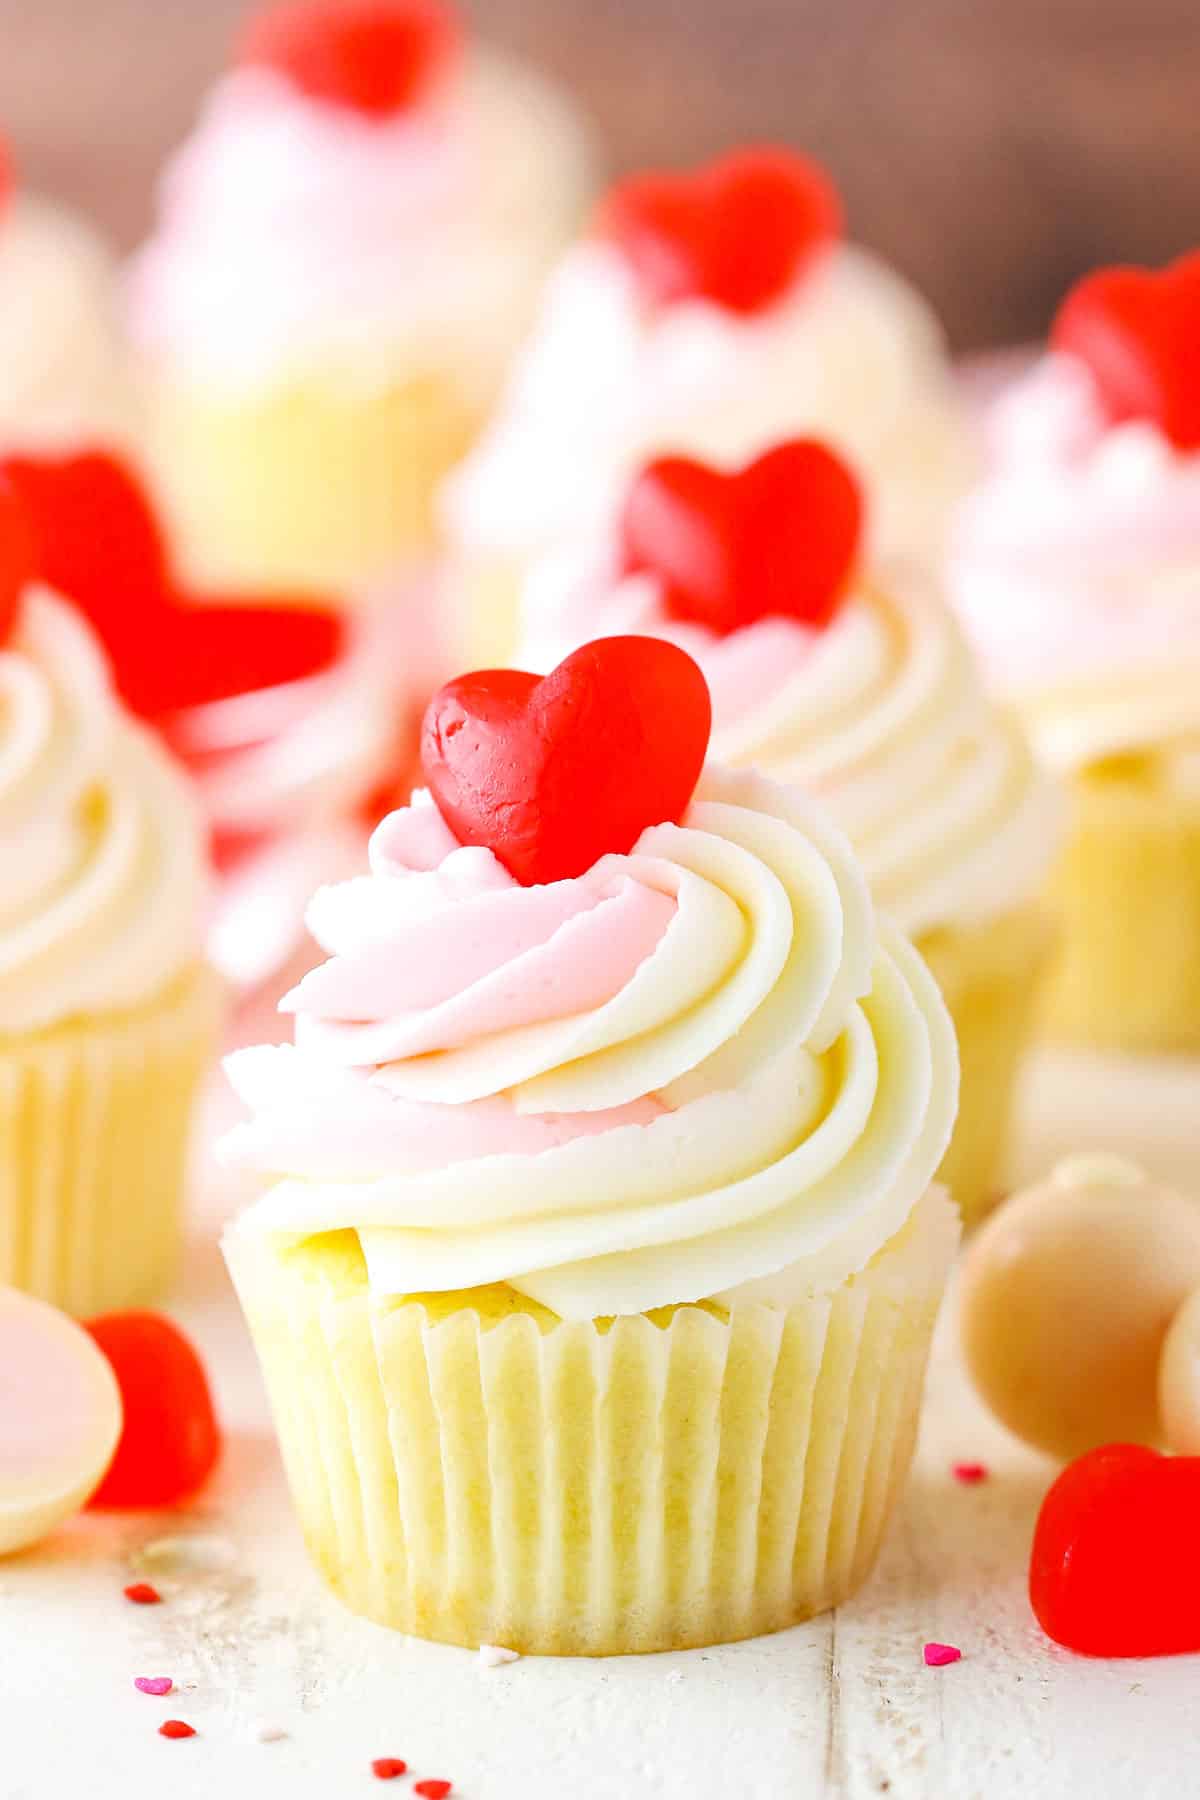 A Strawberry Truffle Cupcake on a white table top